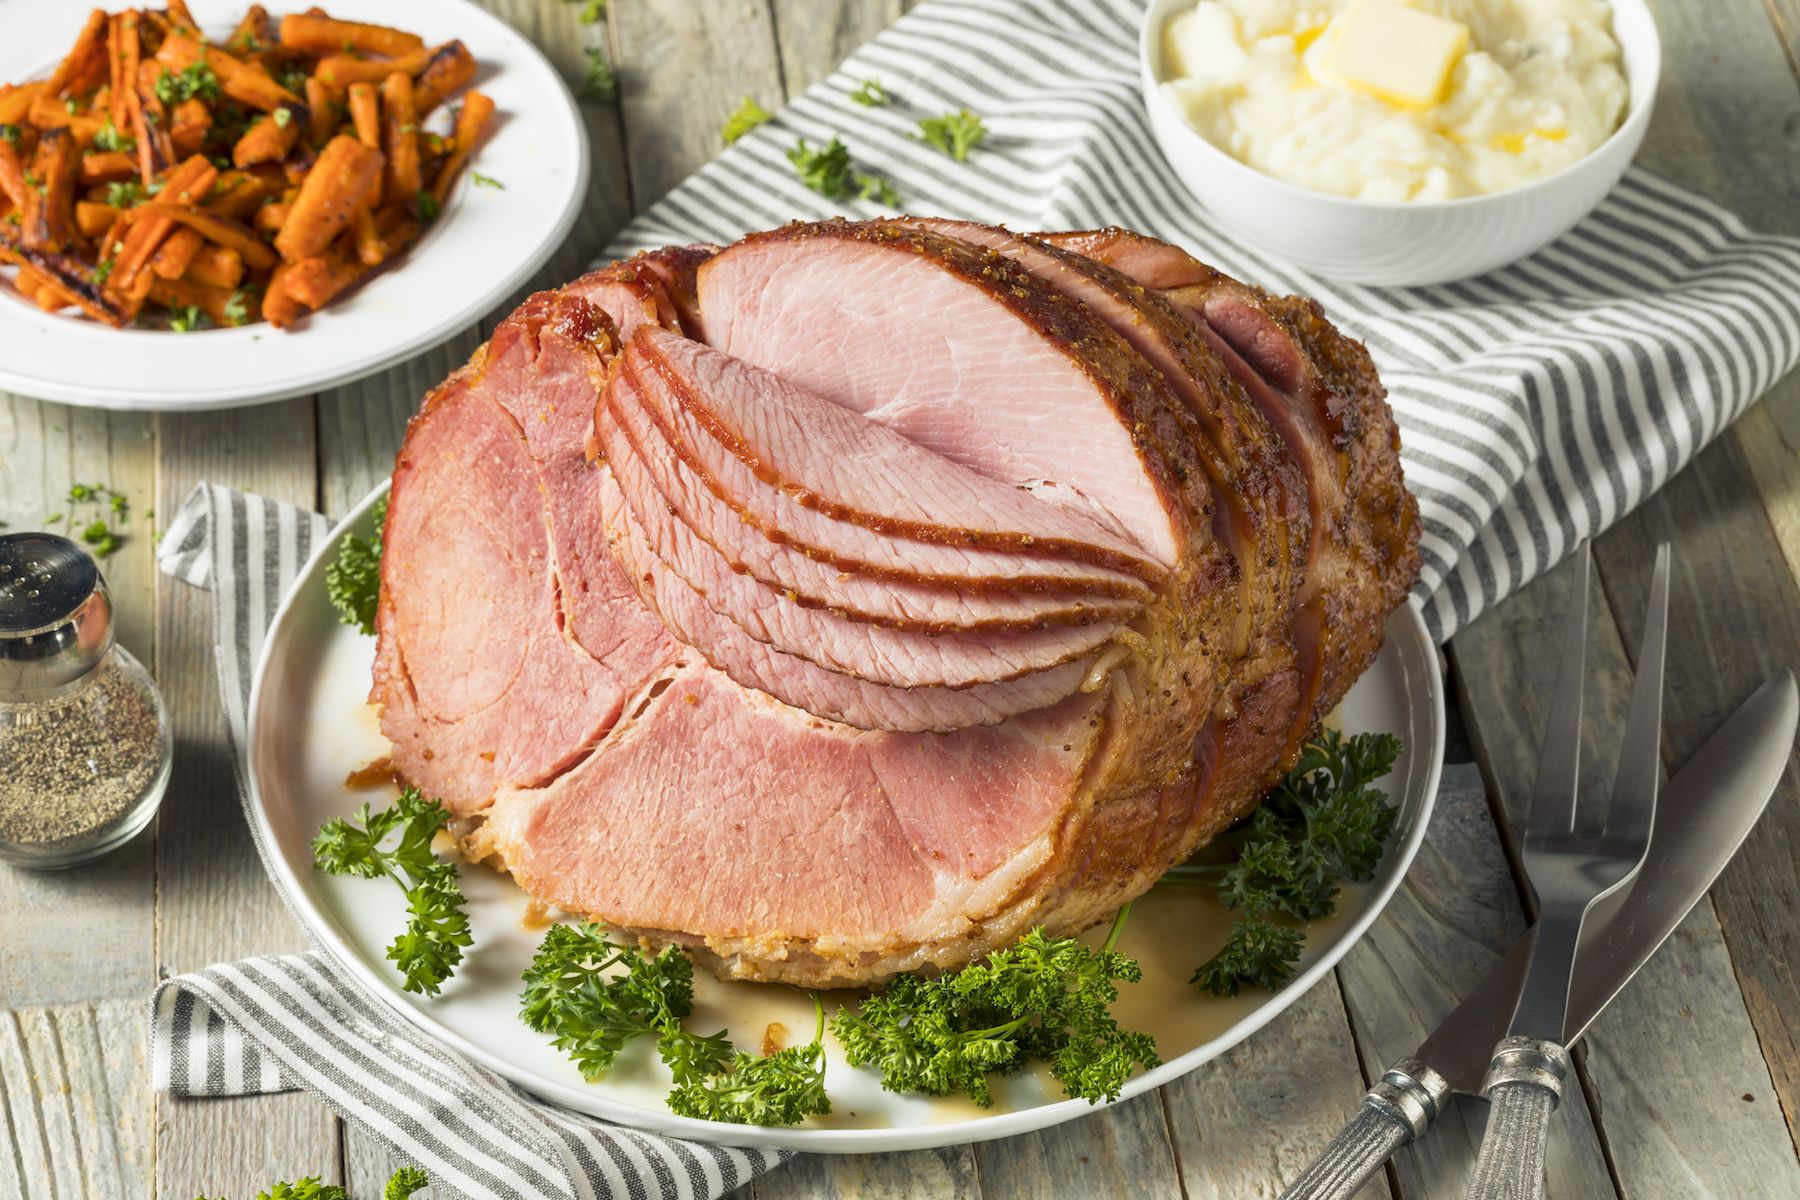 How to Cook a Ham and Impress Your Dinner Guests